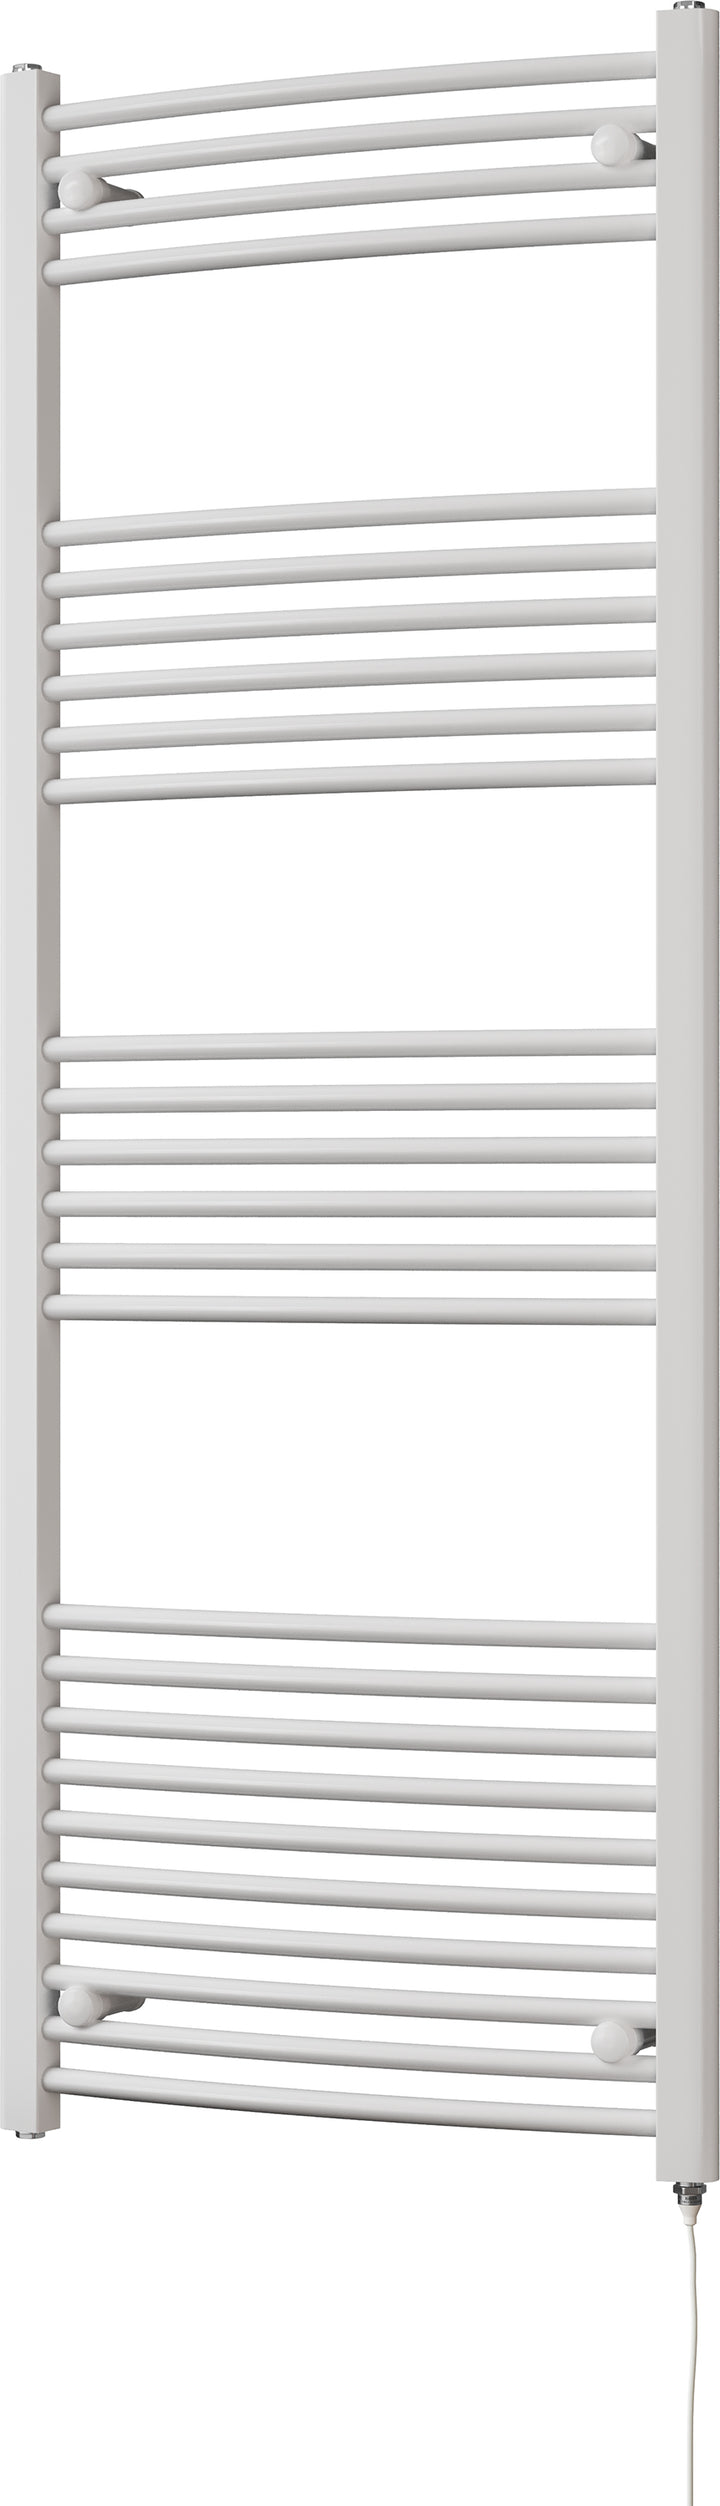 Zennor - White Electric Towel Rail H1600mm x W600mm Curved 600w Standard